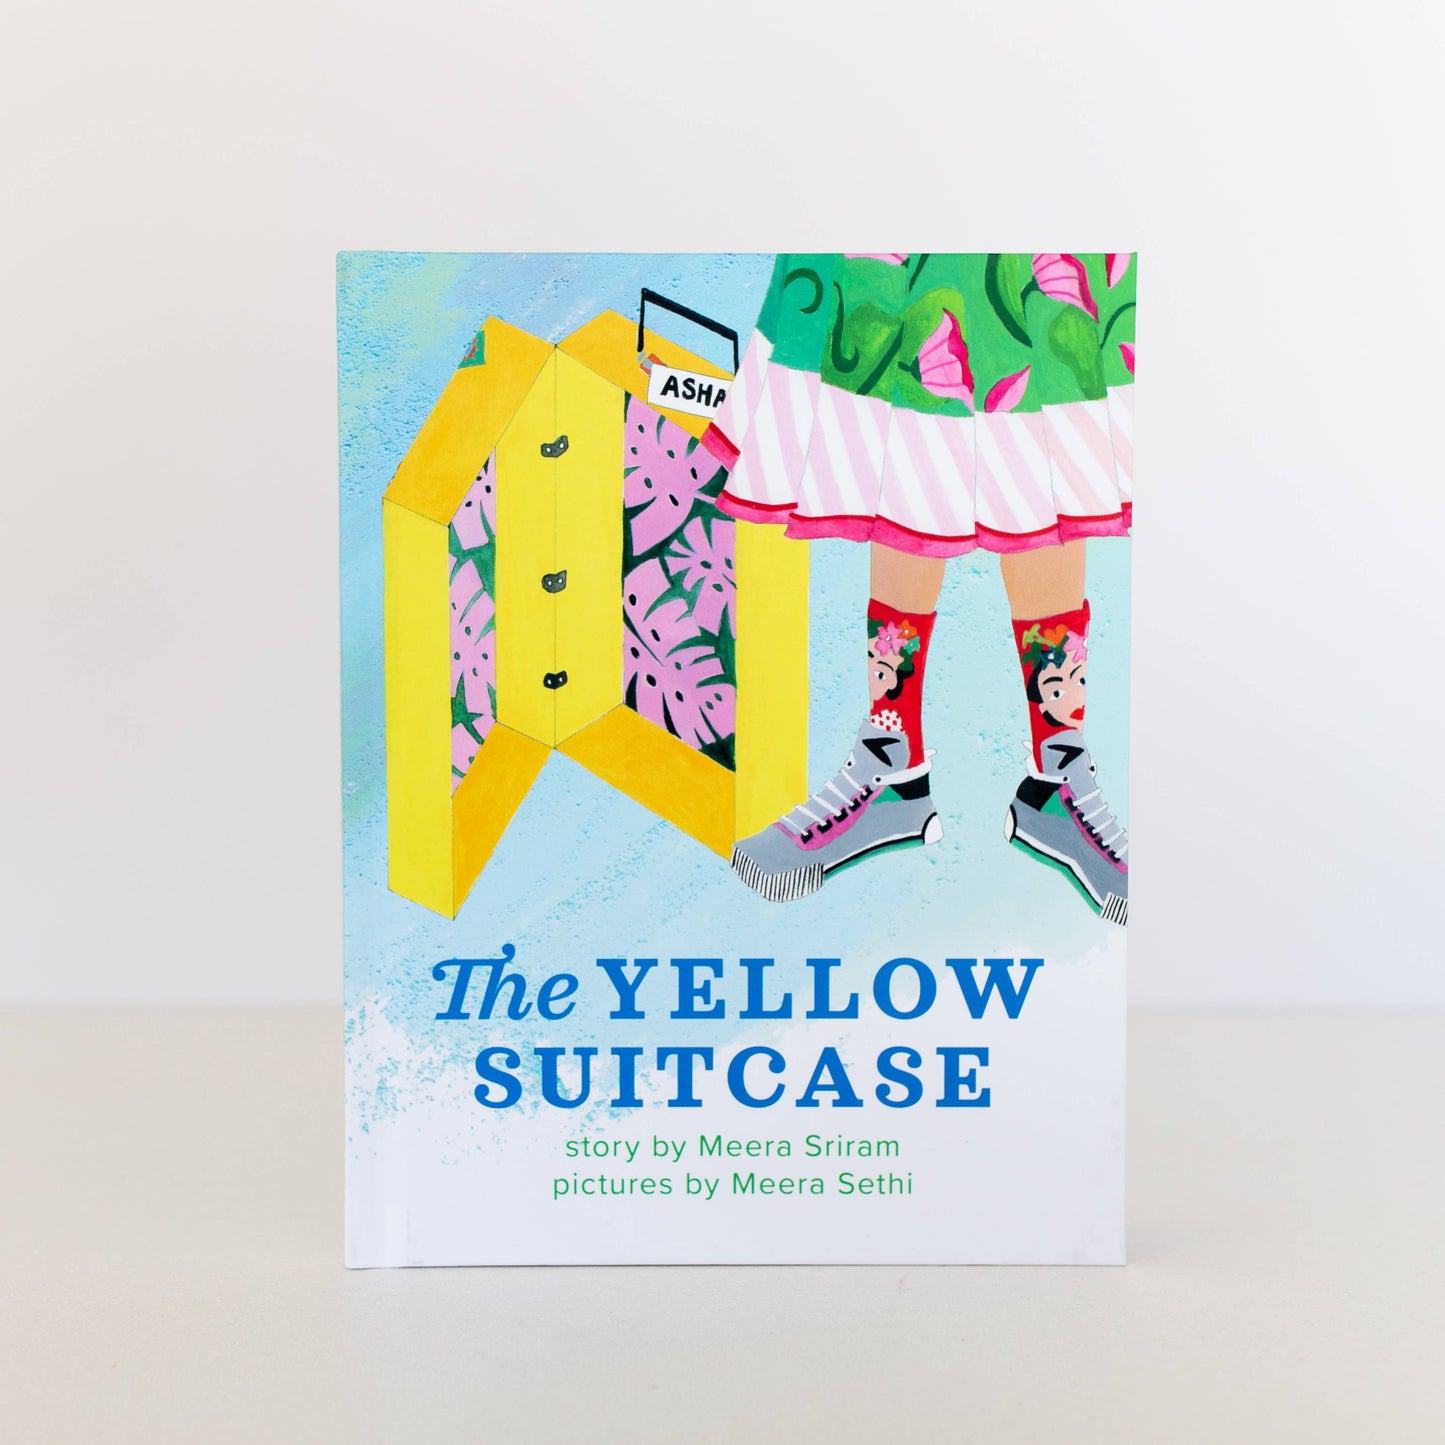 The Yellow Suitcase (illustrated children's book)